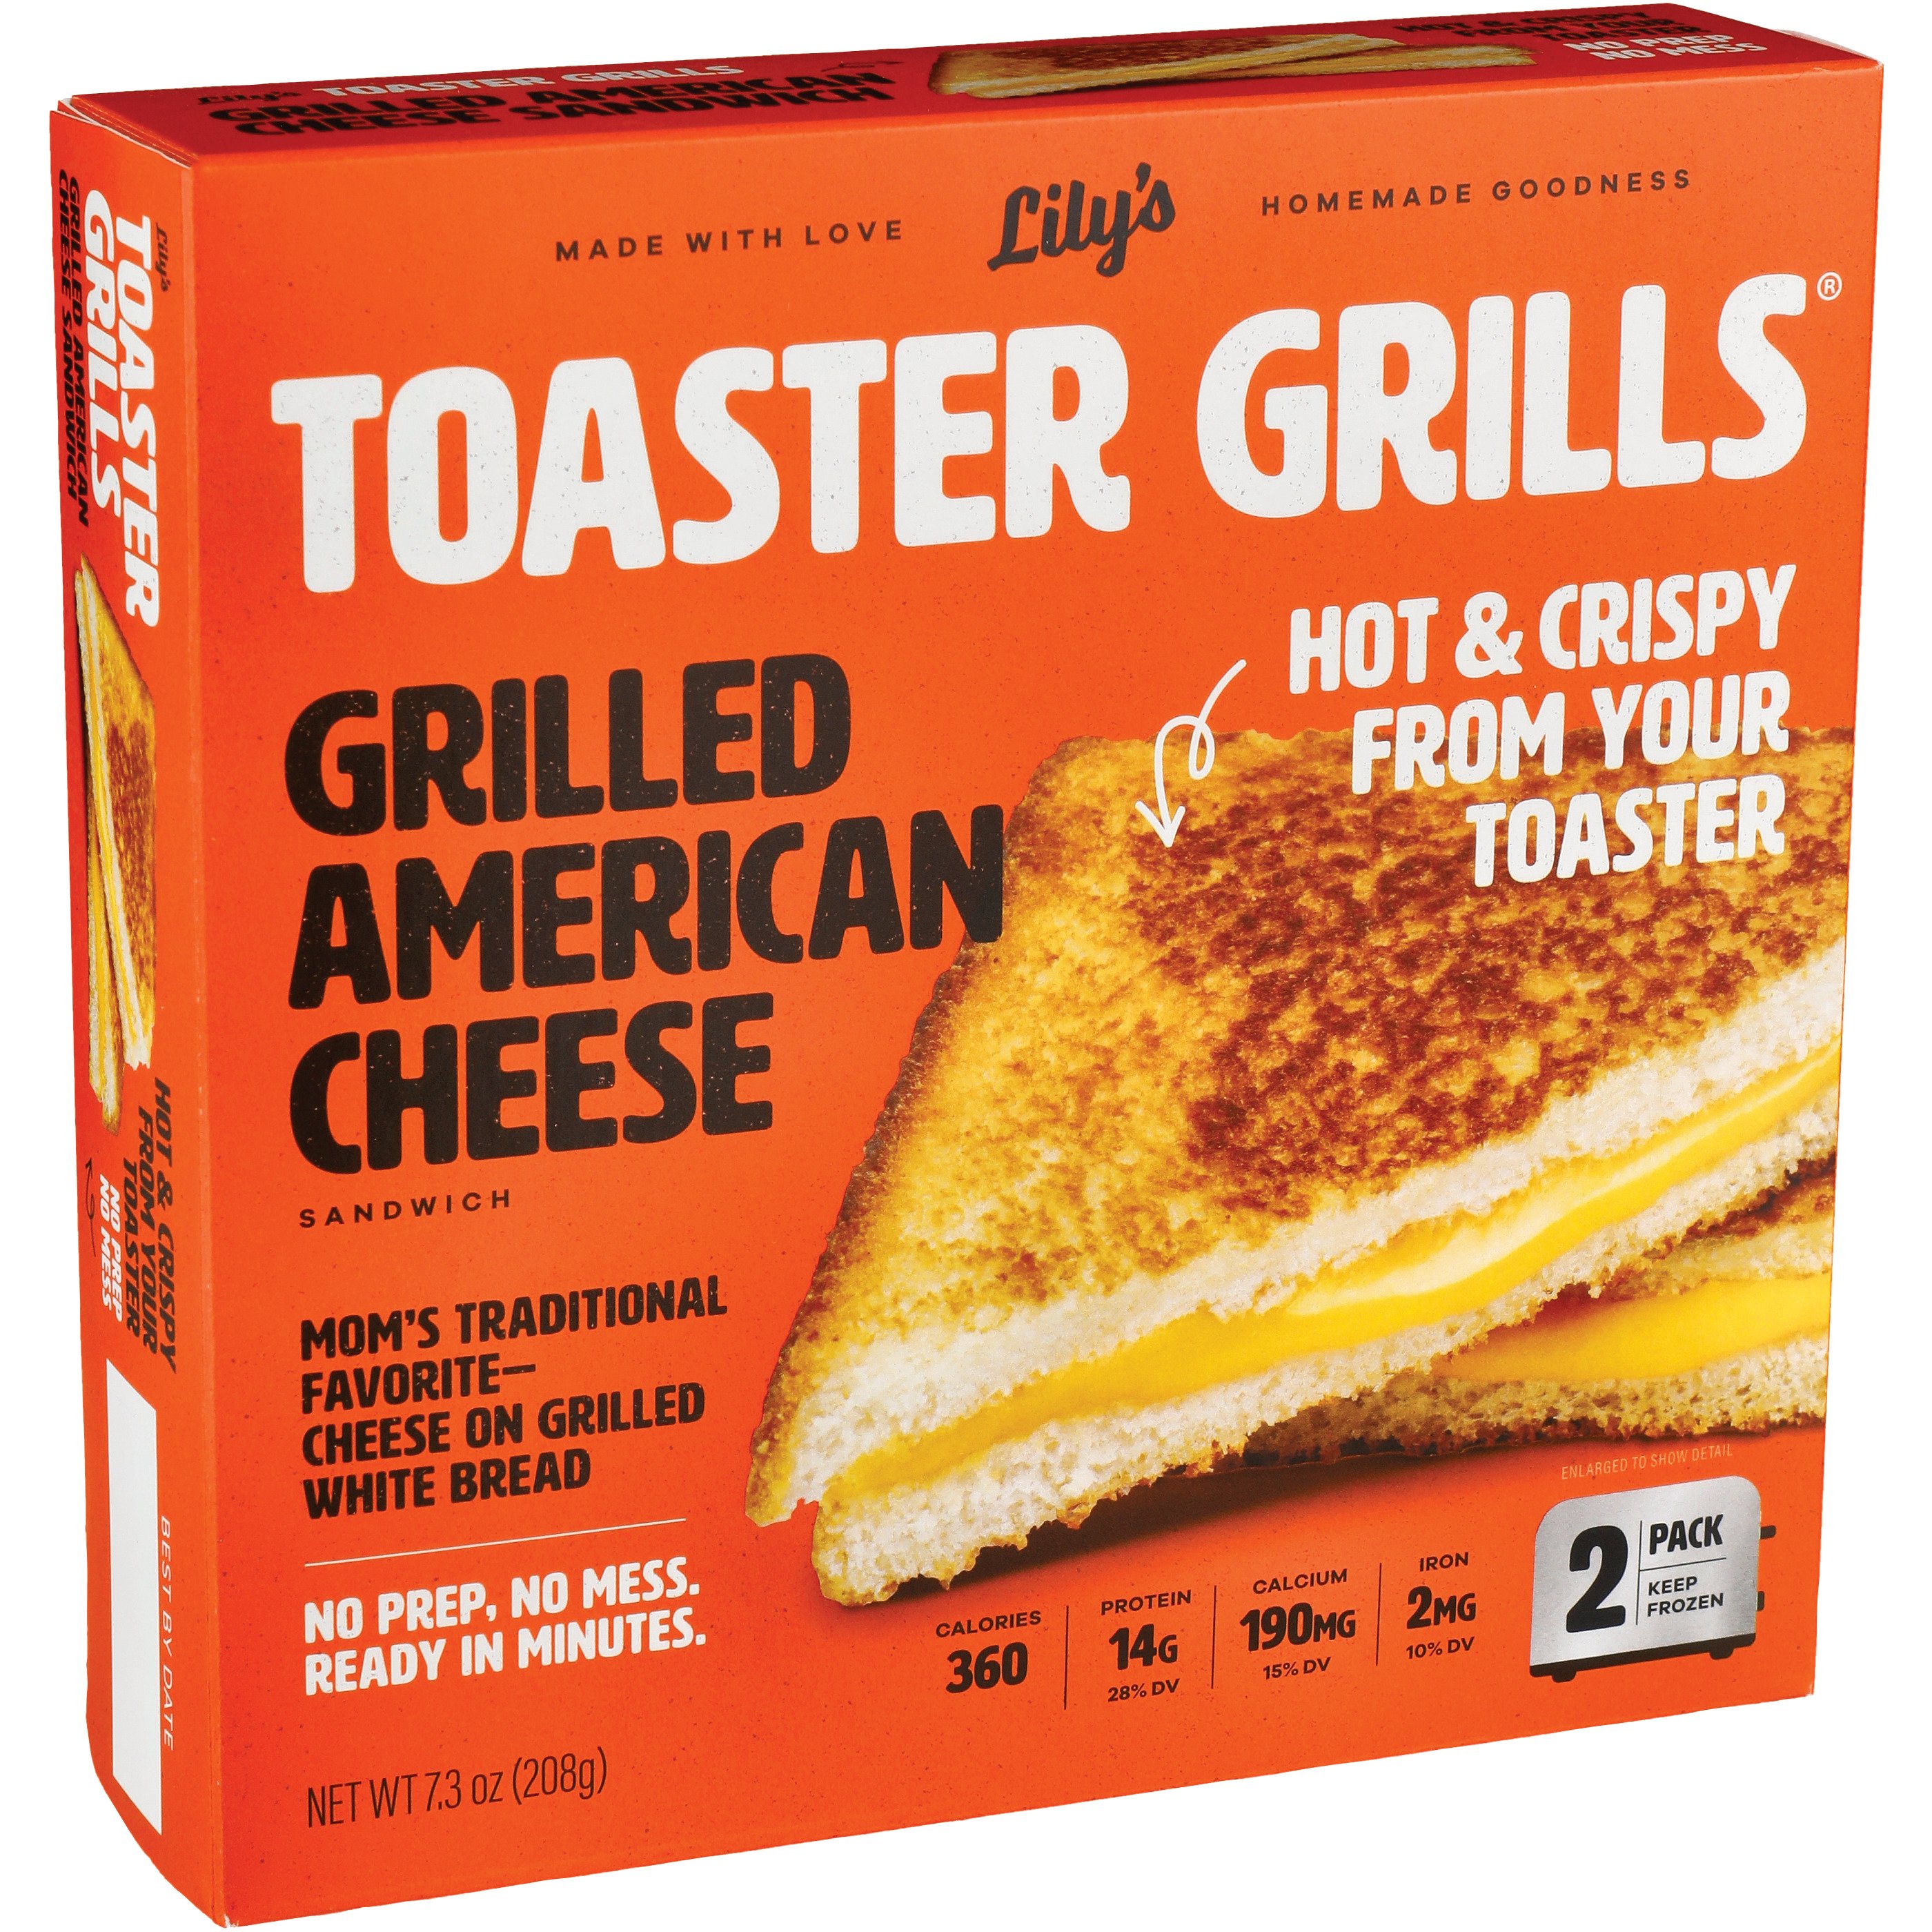 What Is A Grilled Cheese Toaster?